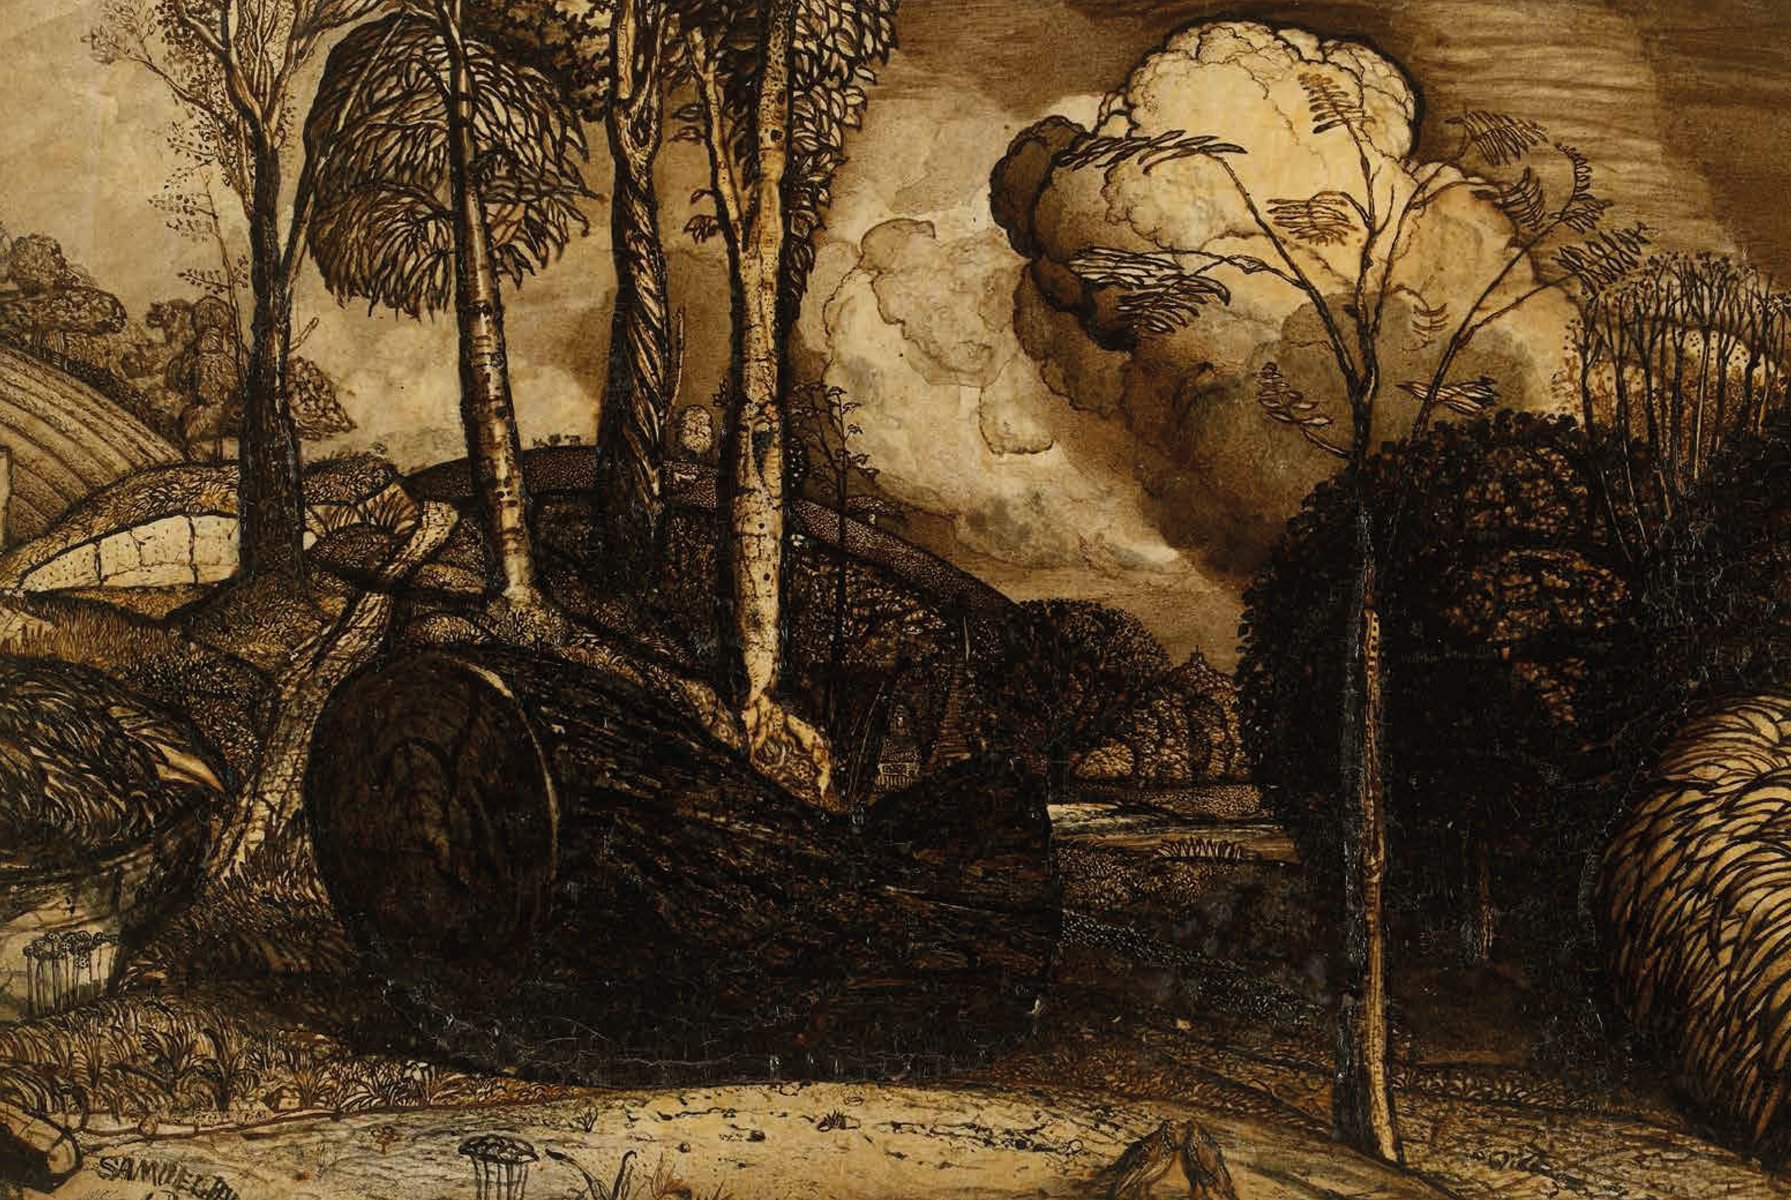 Sepia painting of the valley thick with corn, on cover of 'The Works of Samuel Palmer', by Ashmolean Museum.